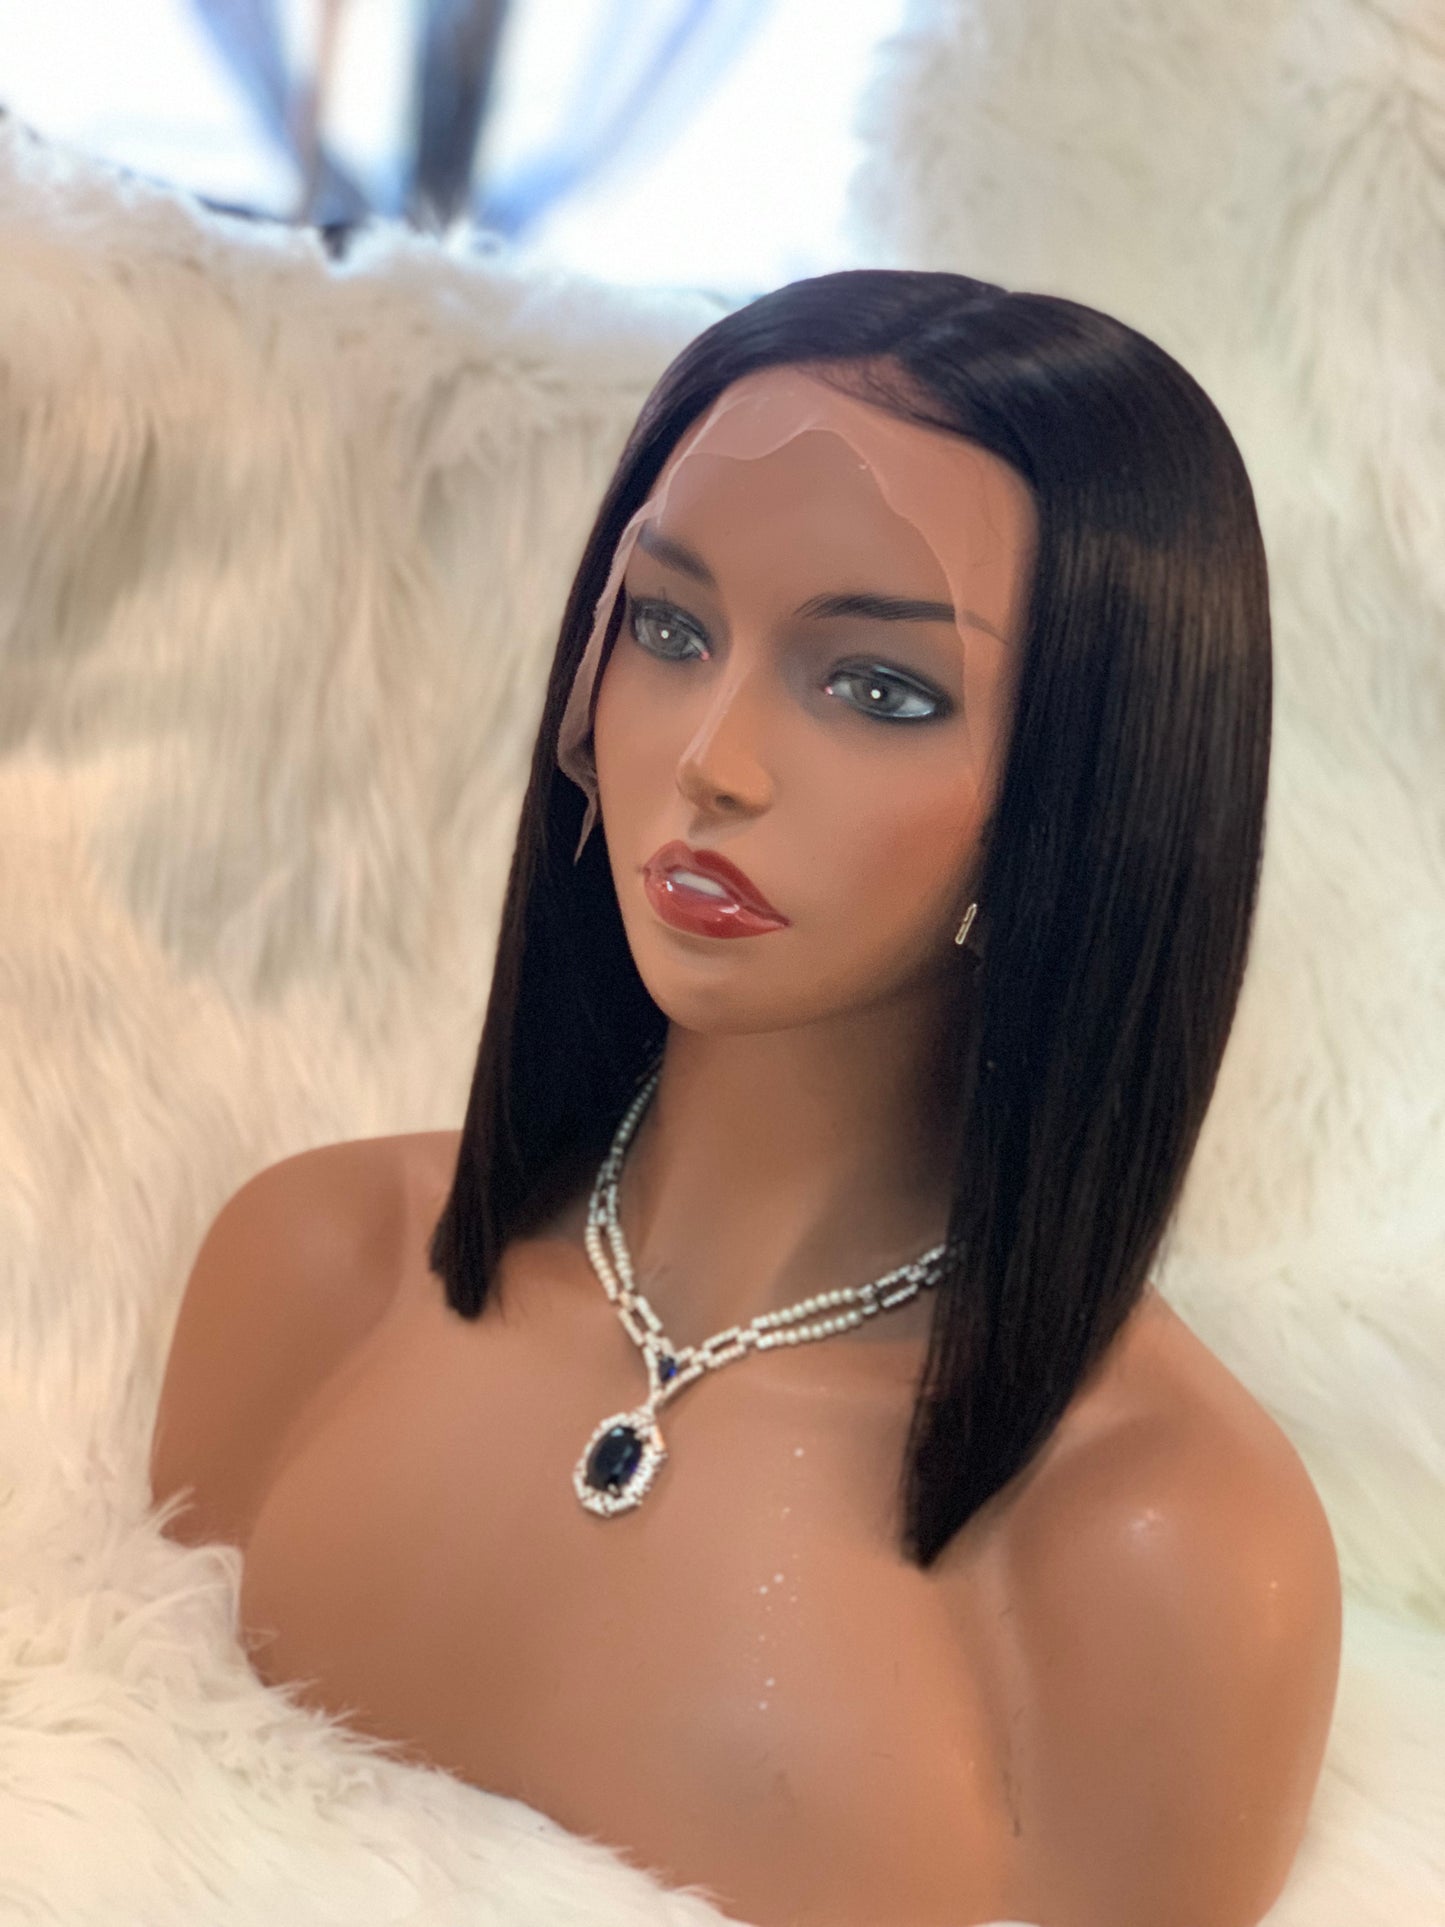 “Straight Blunt” Lace front bob wig